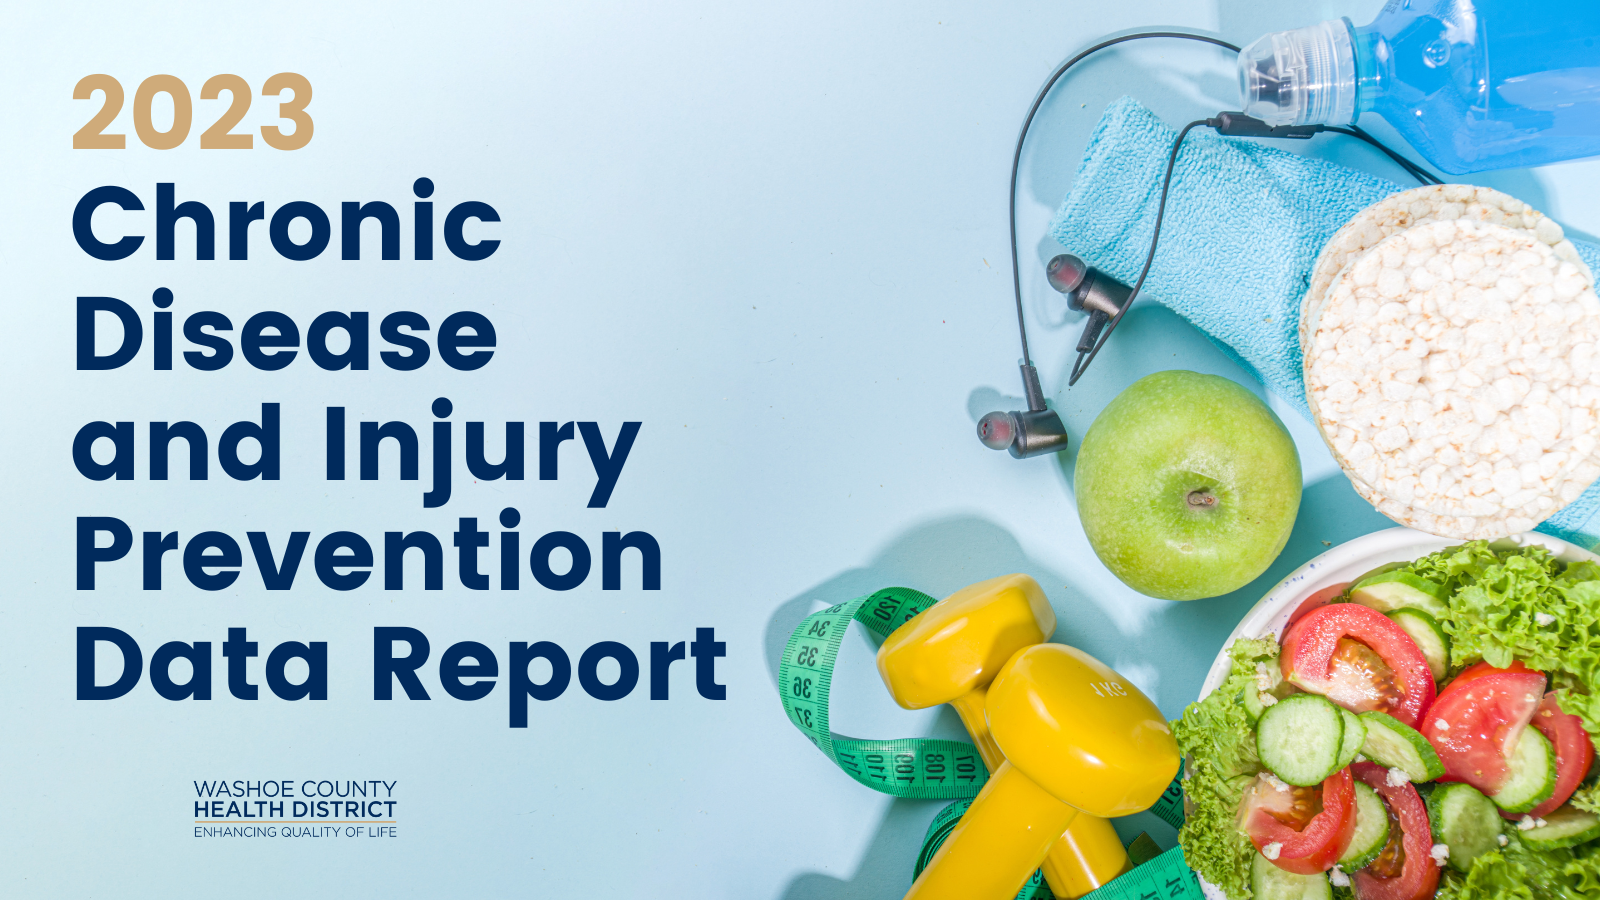 Chronic disease and injury prevention data report with healthy food present.